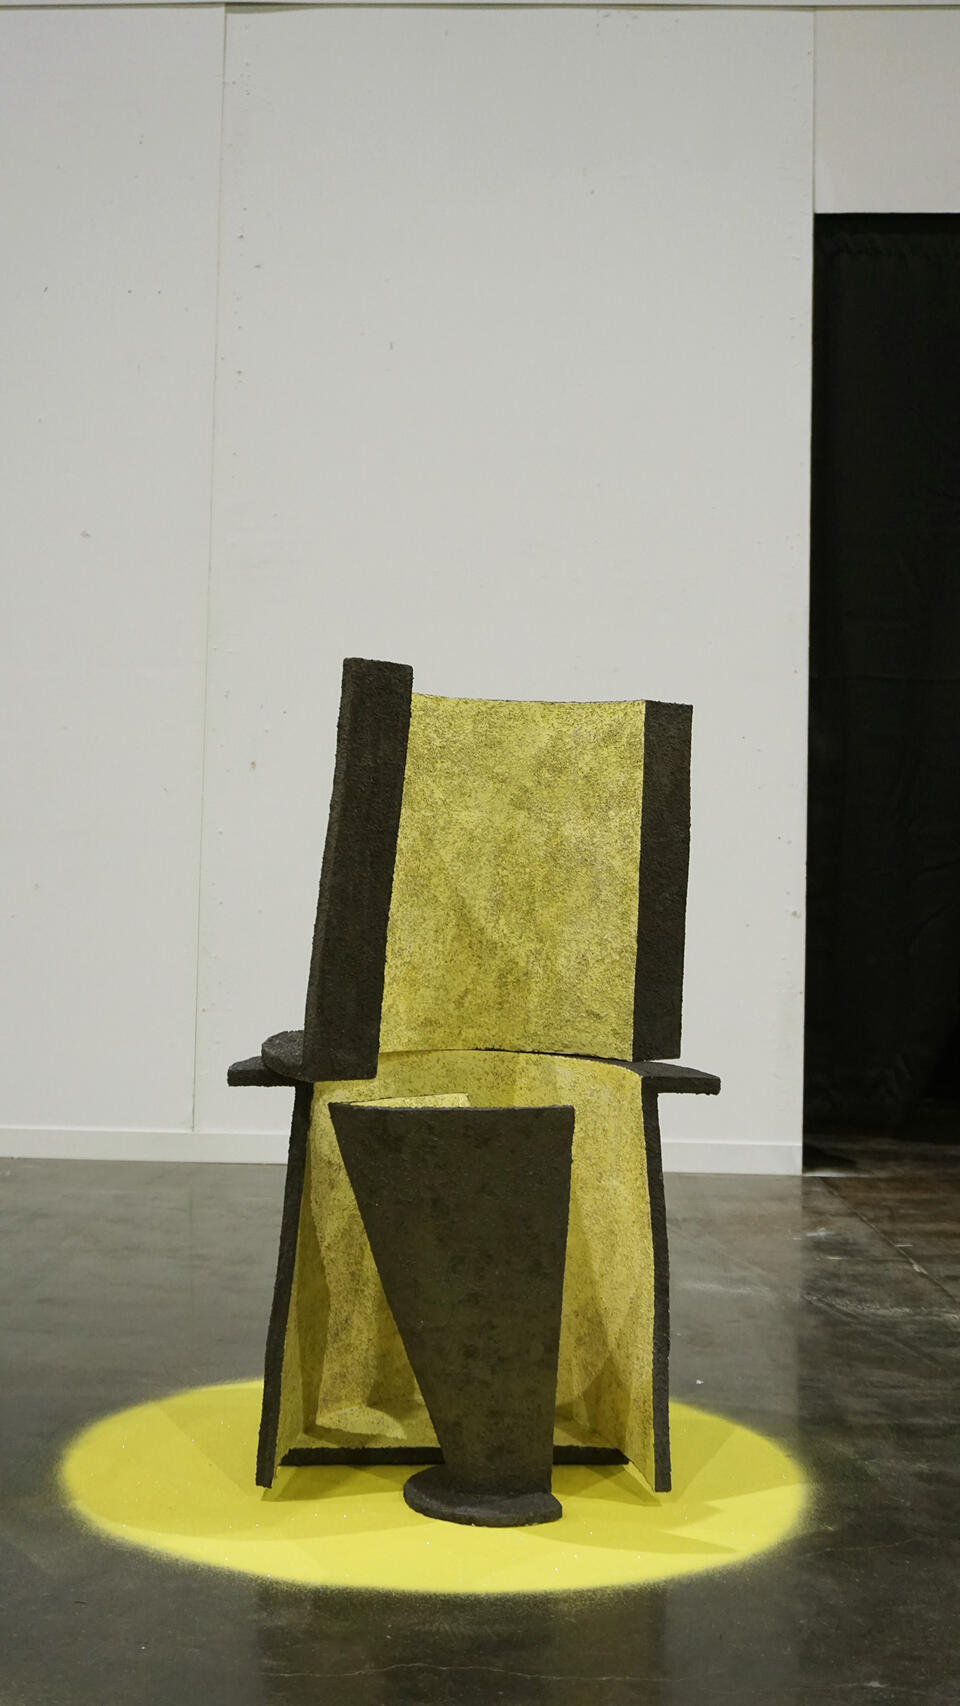 A textured, geometric ceramic chair with a tall back and angular seat, predominantly yellow with black accents, is placed on a yellow circular base in a minimalist gallery space.